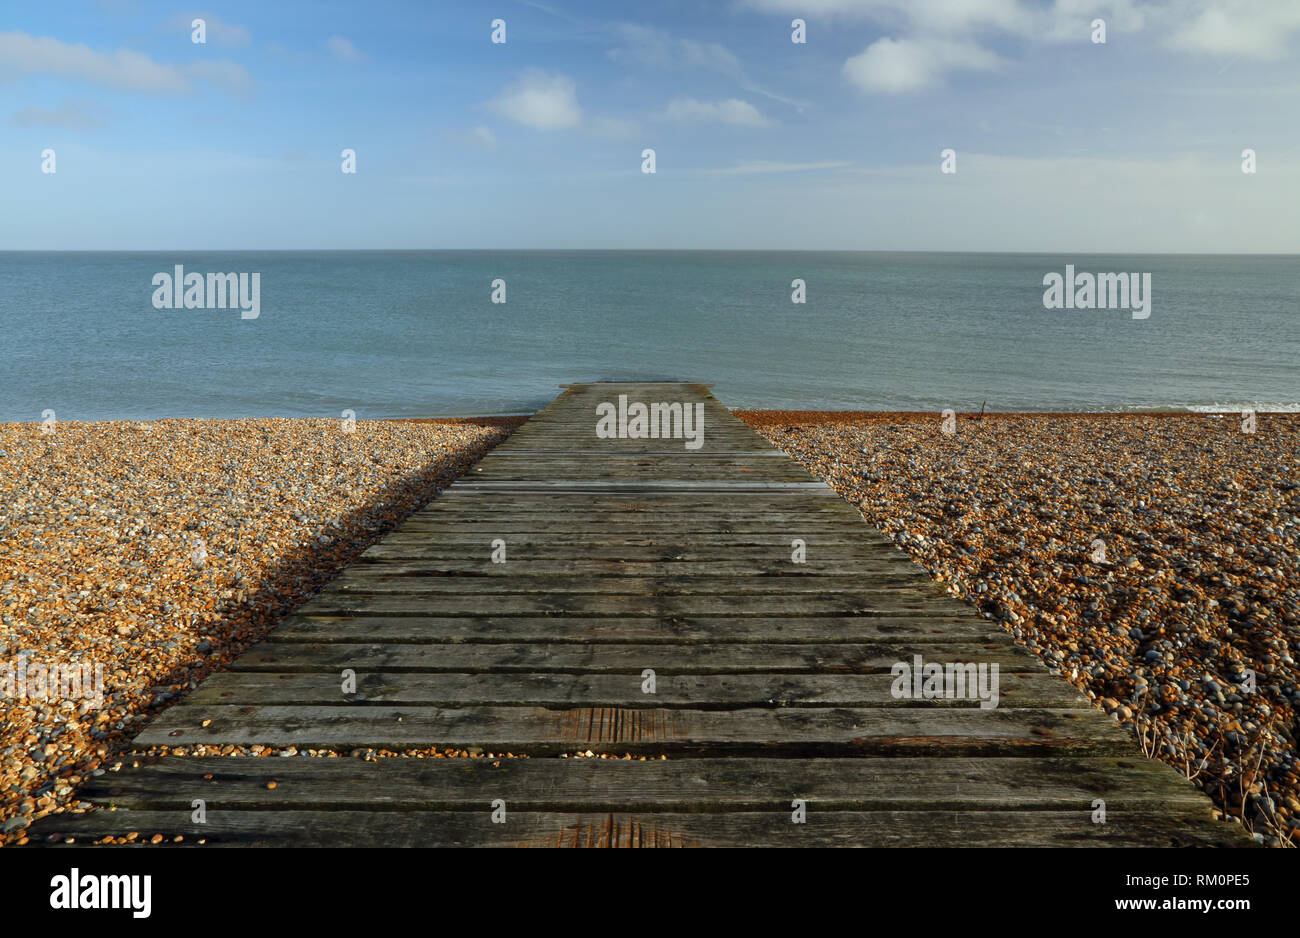 A wooden slipway leads from the shingle beach to the sea at Sandwich Bay, Kent, UK. Stock Photo